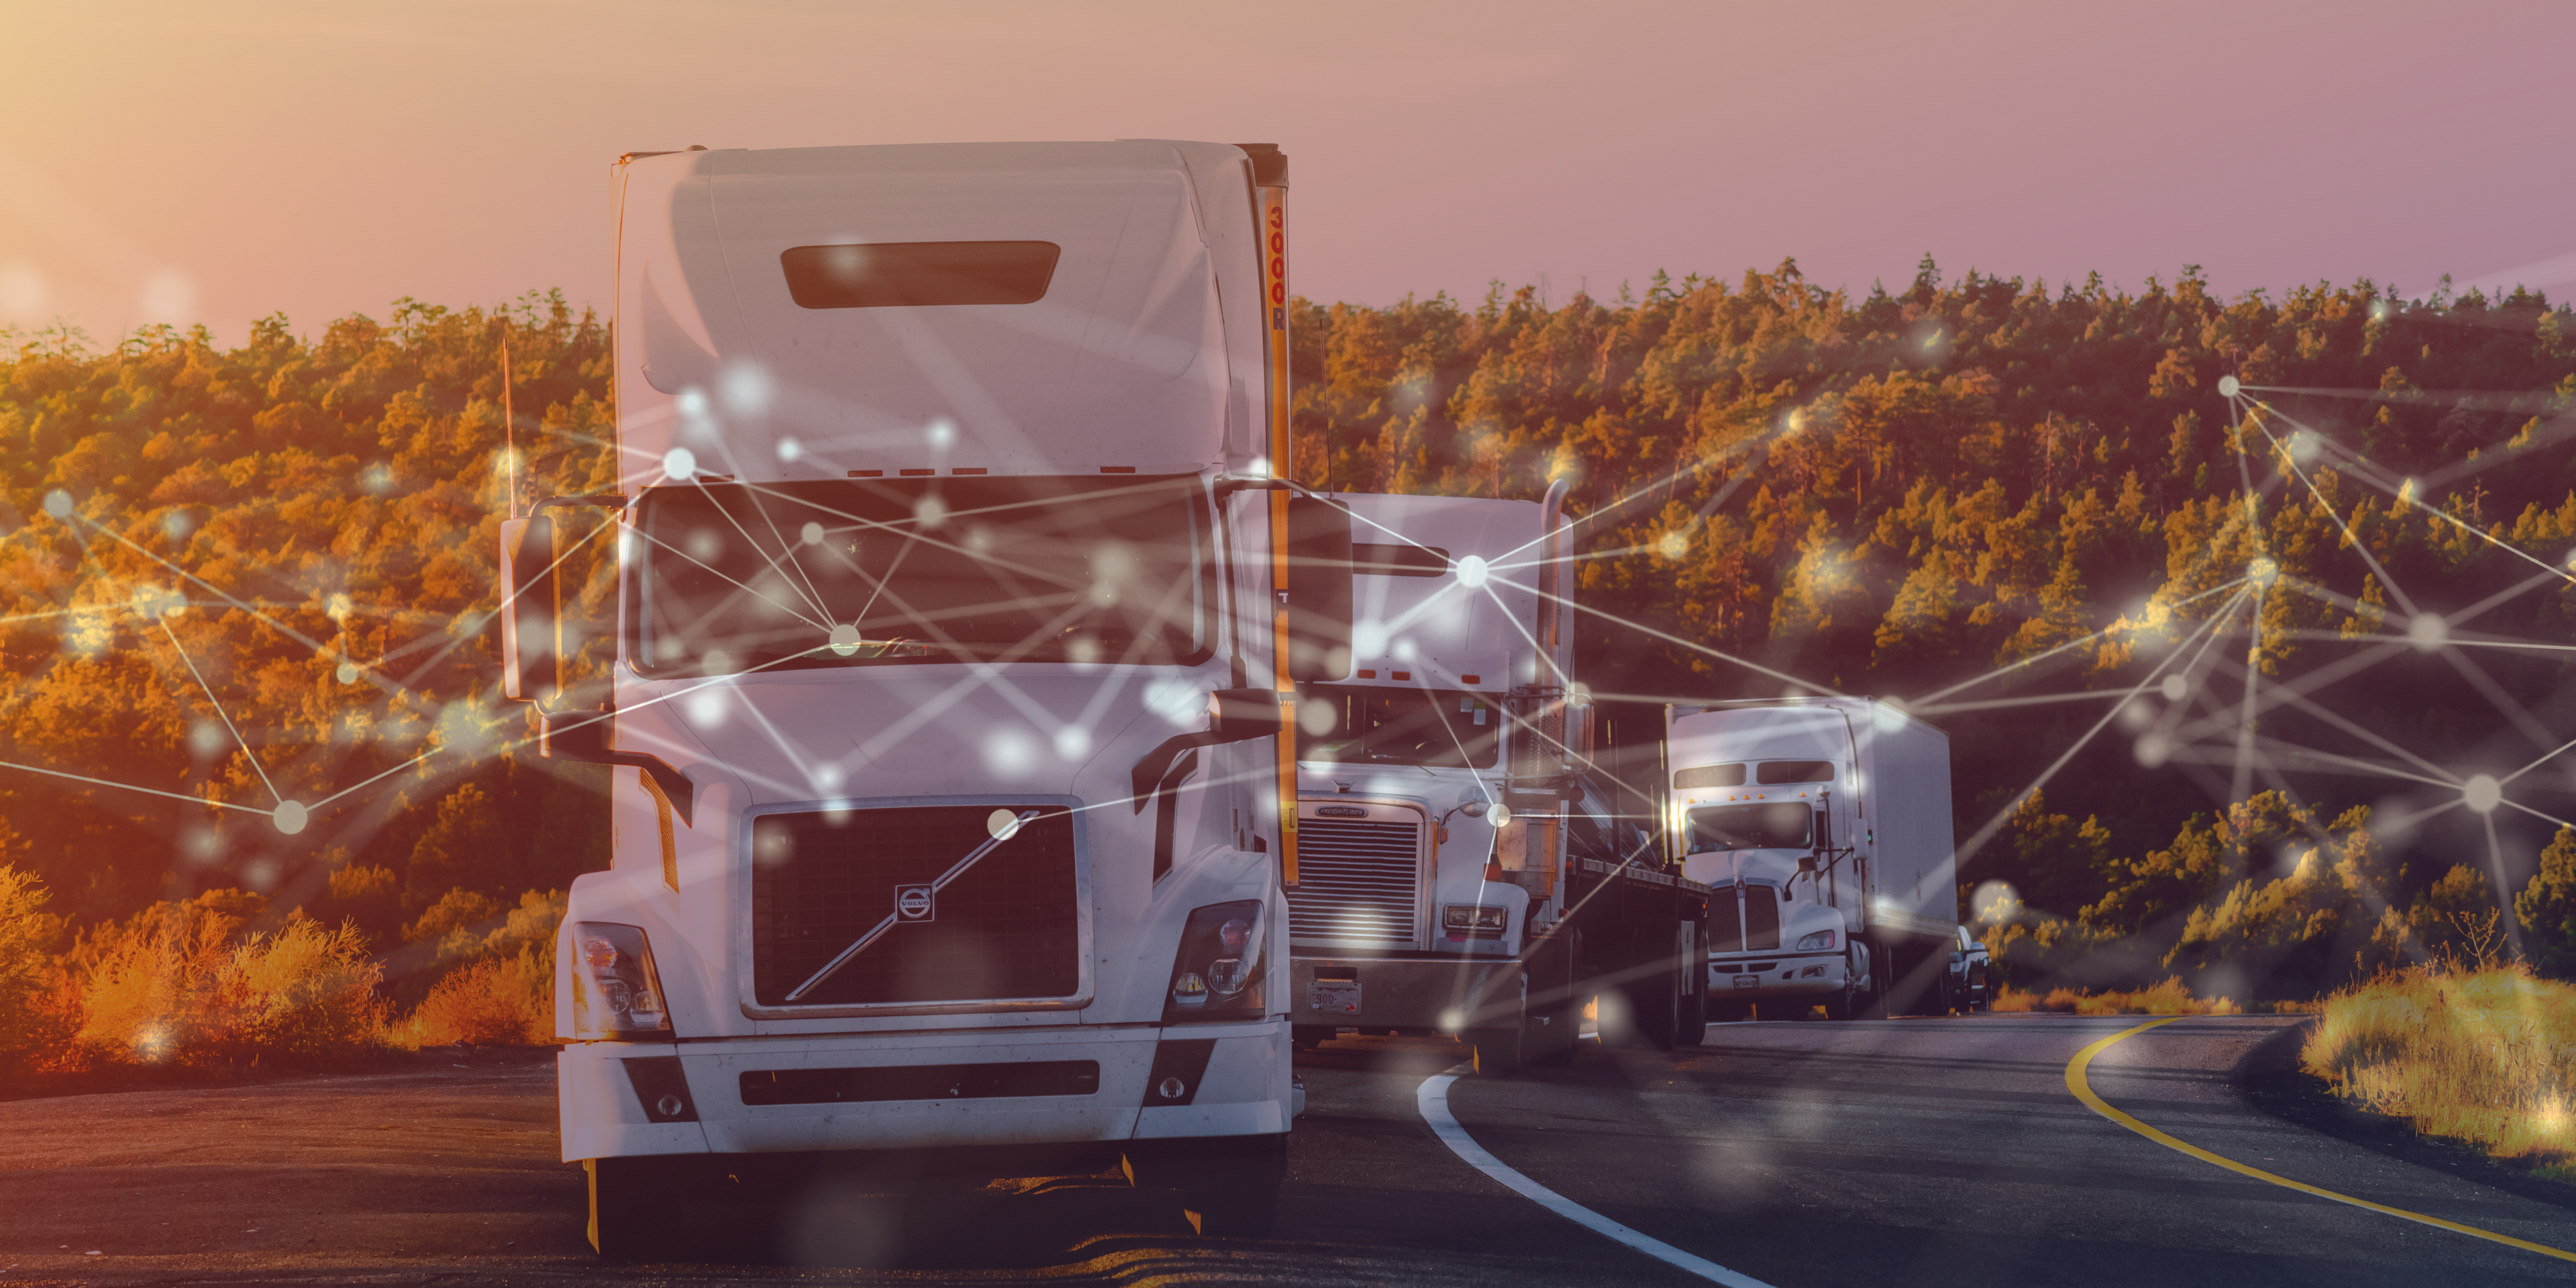 Blockchain food distribution represented by an artist rendering of connected network fibers superimposed over a row of semi trucks driving down a highway as the sun is setting.